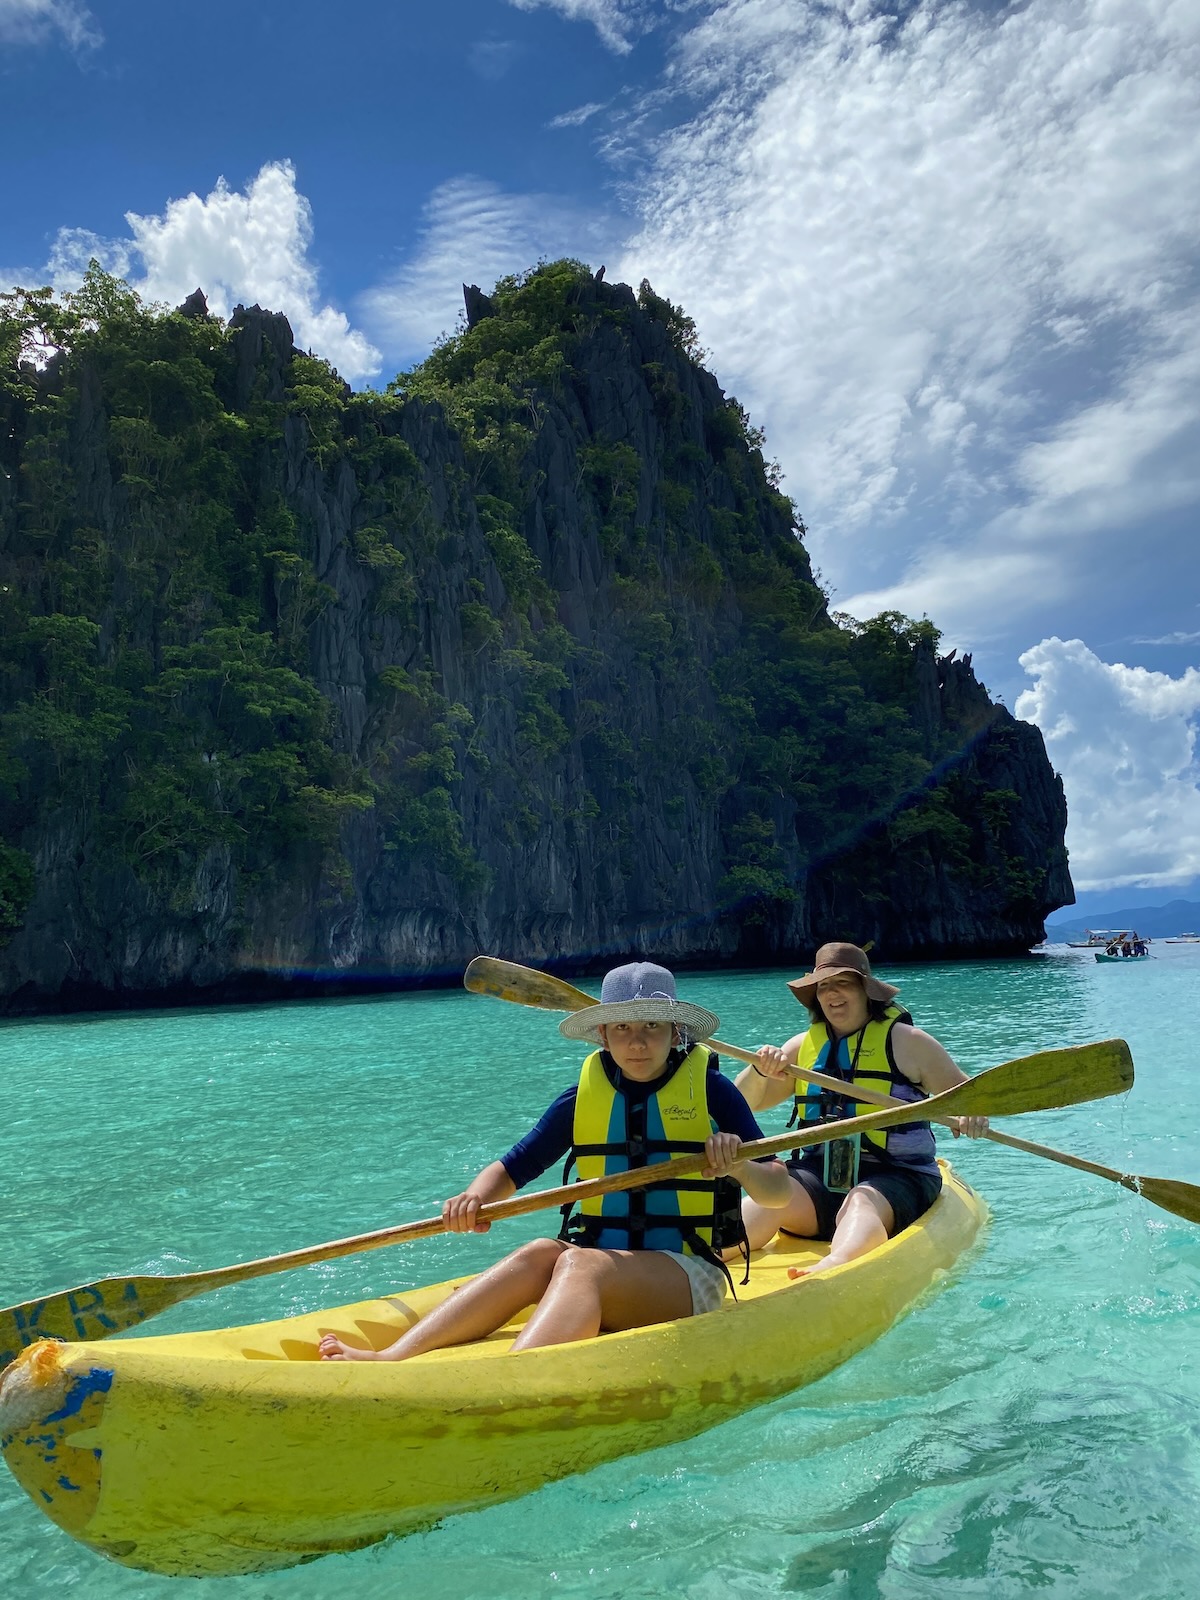 Two women in a kayak with an island cliffside in the background.